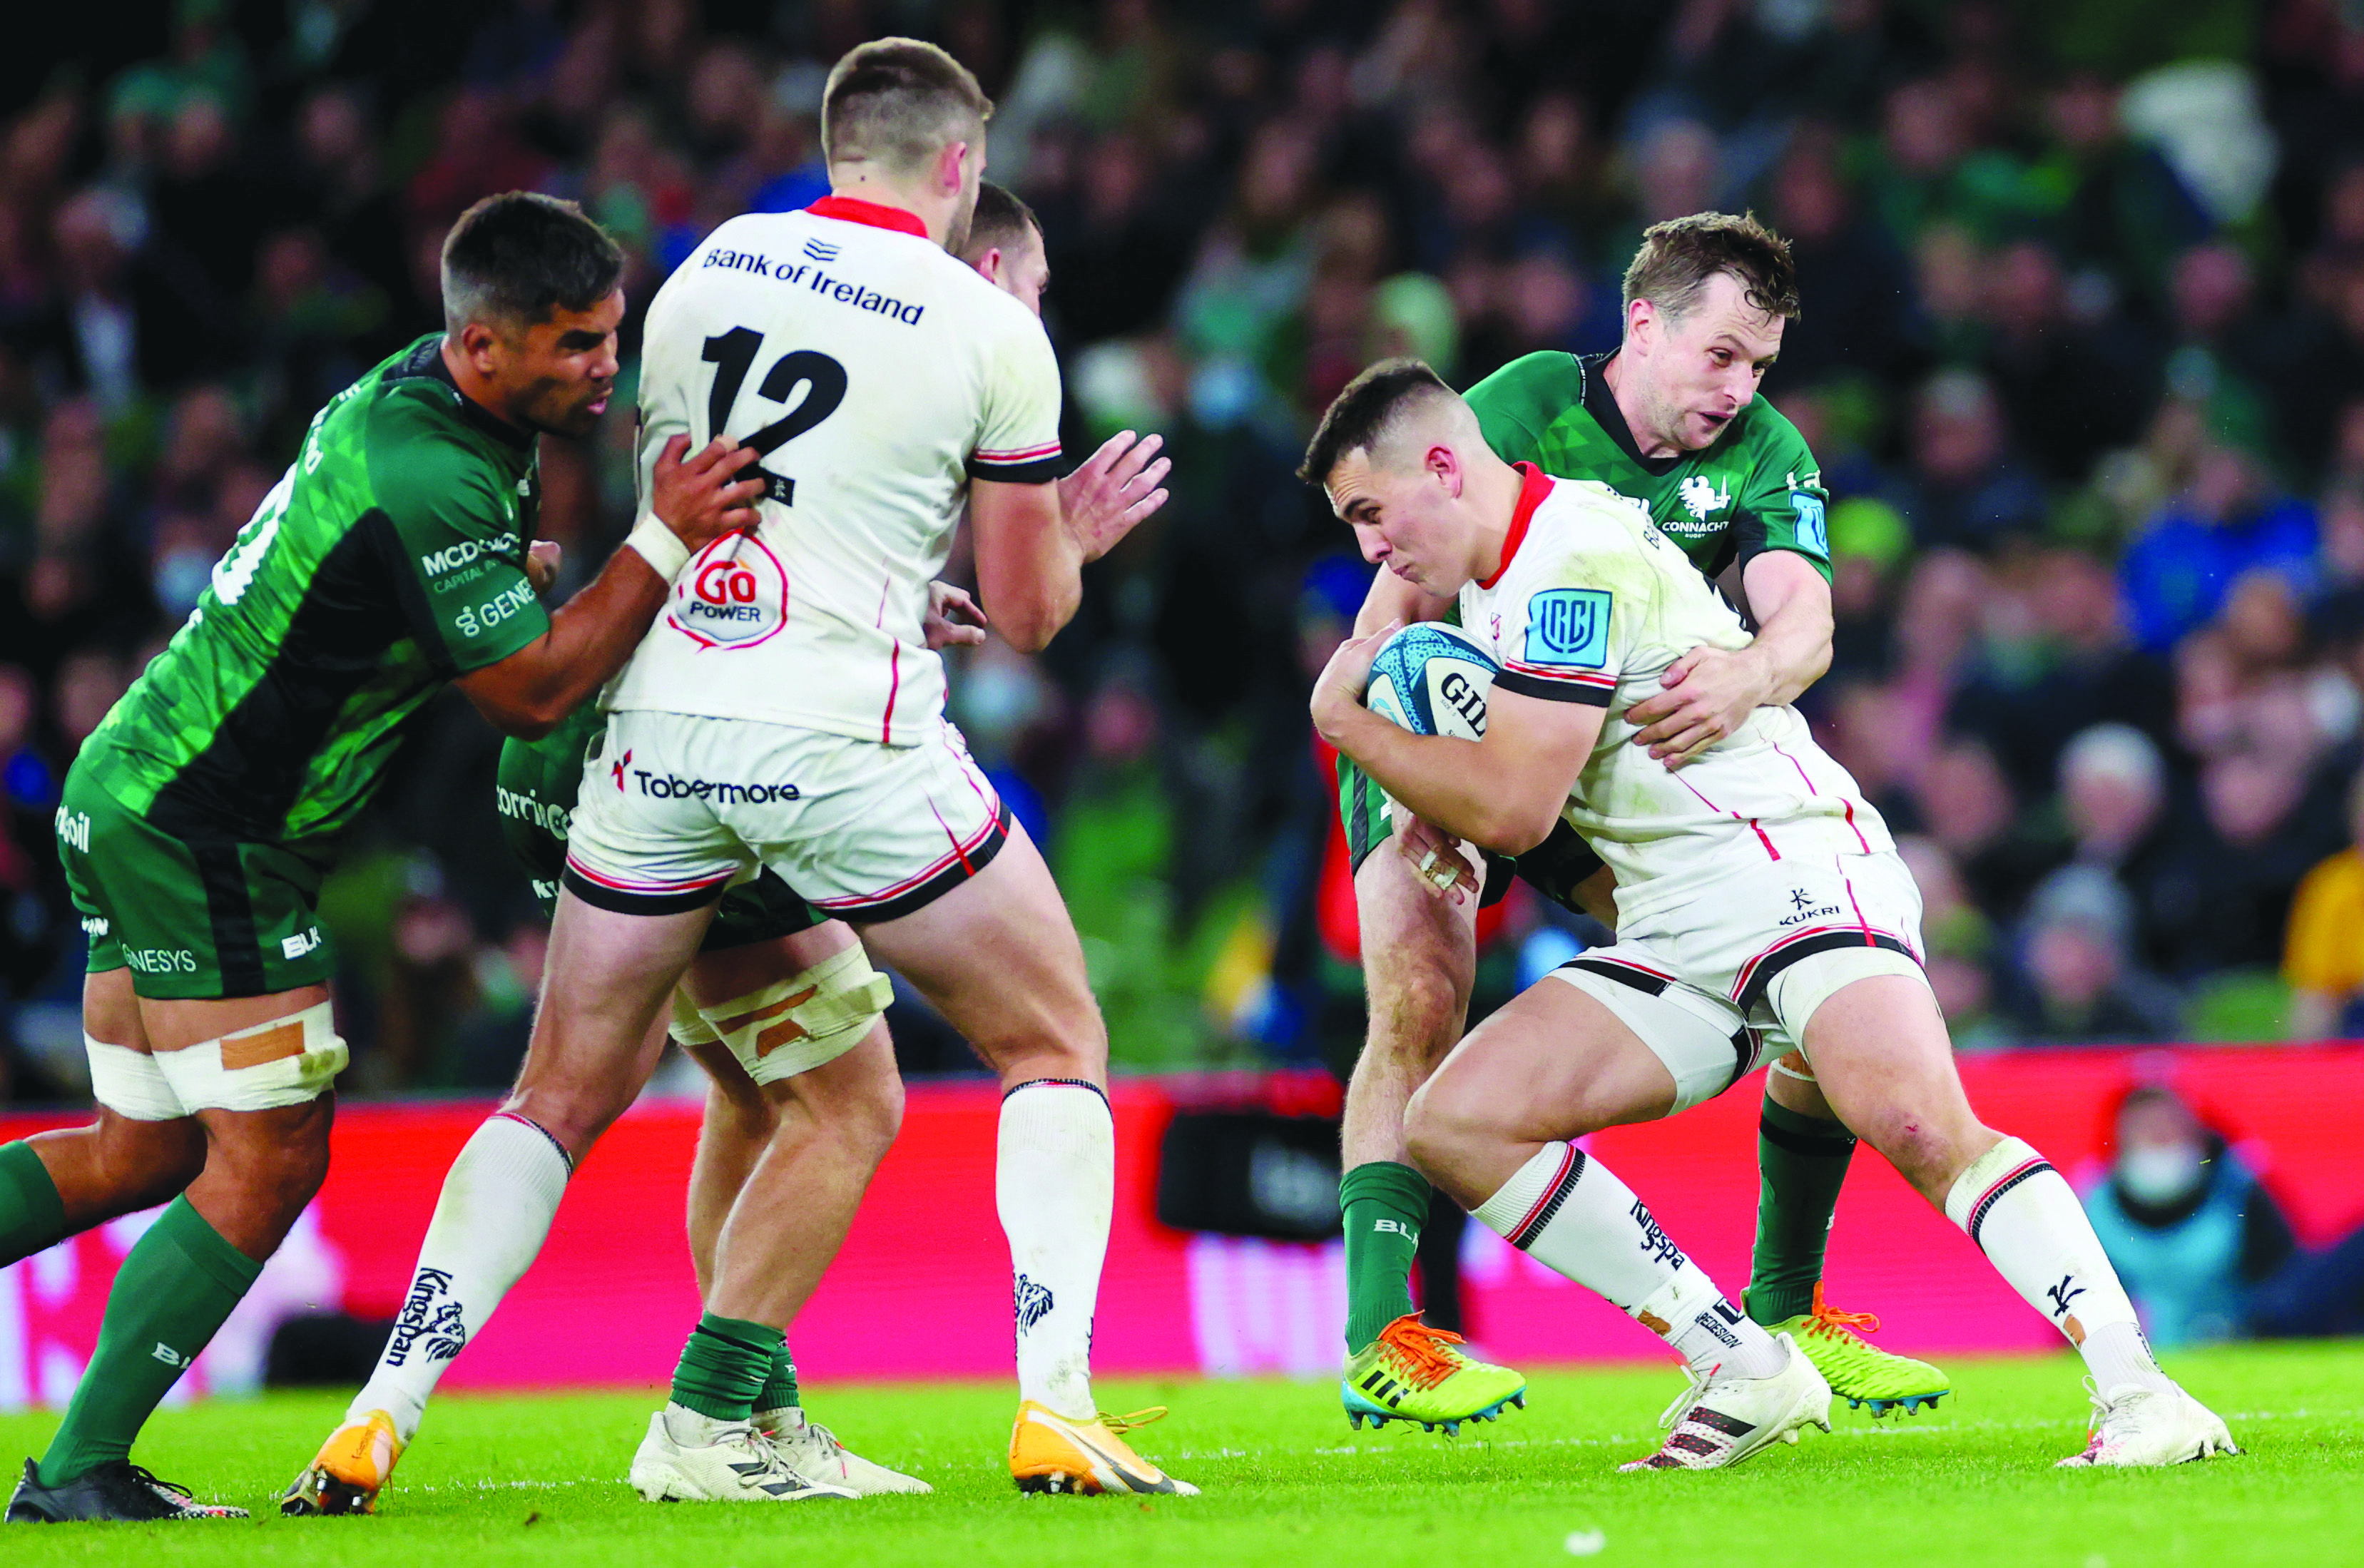 James Hume is challenged by Jack Carty during Connacht’s victory over Ulster in Dublin back in October